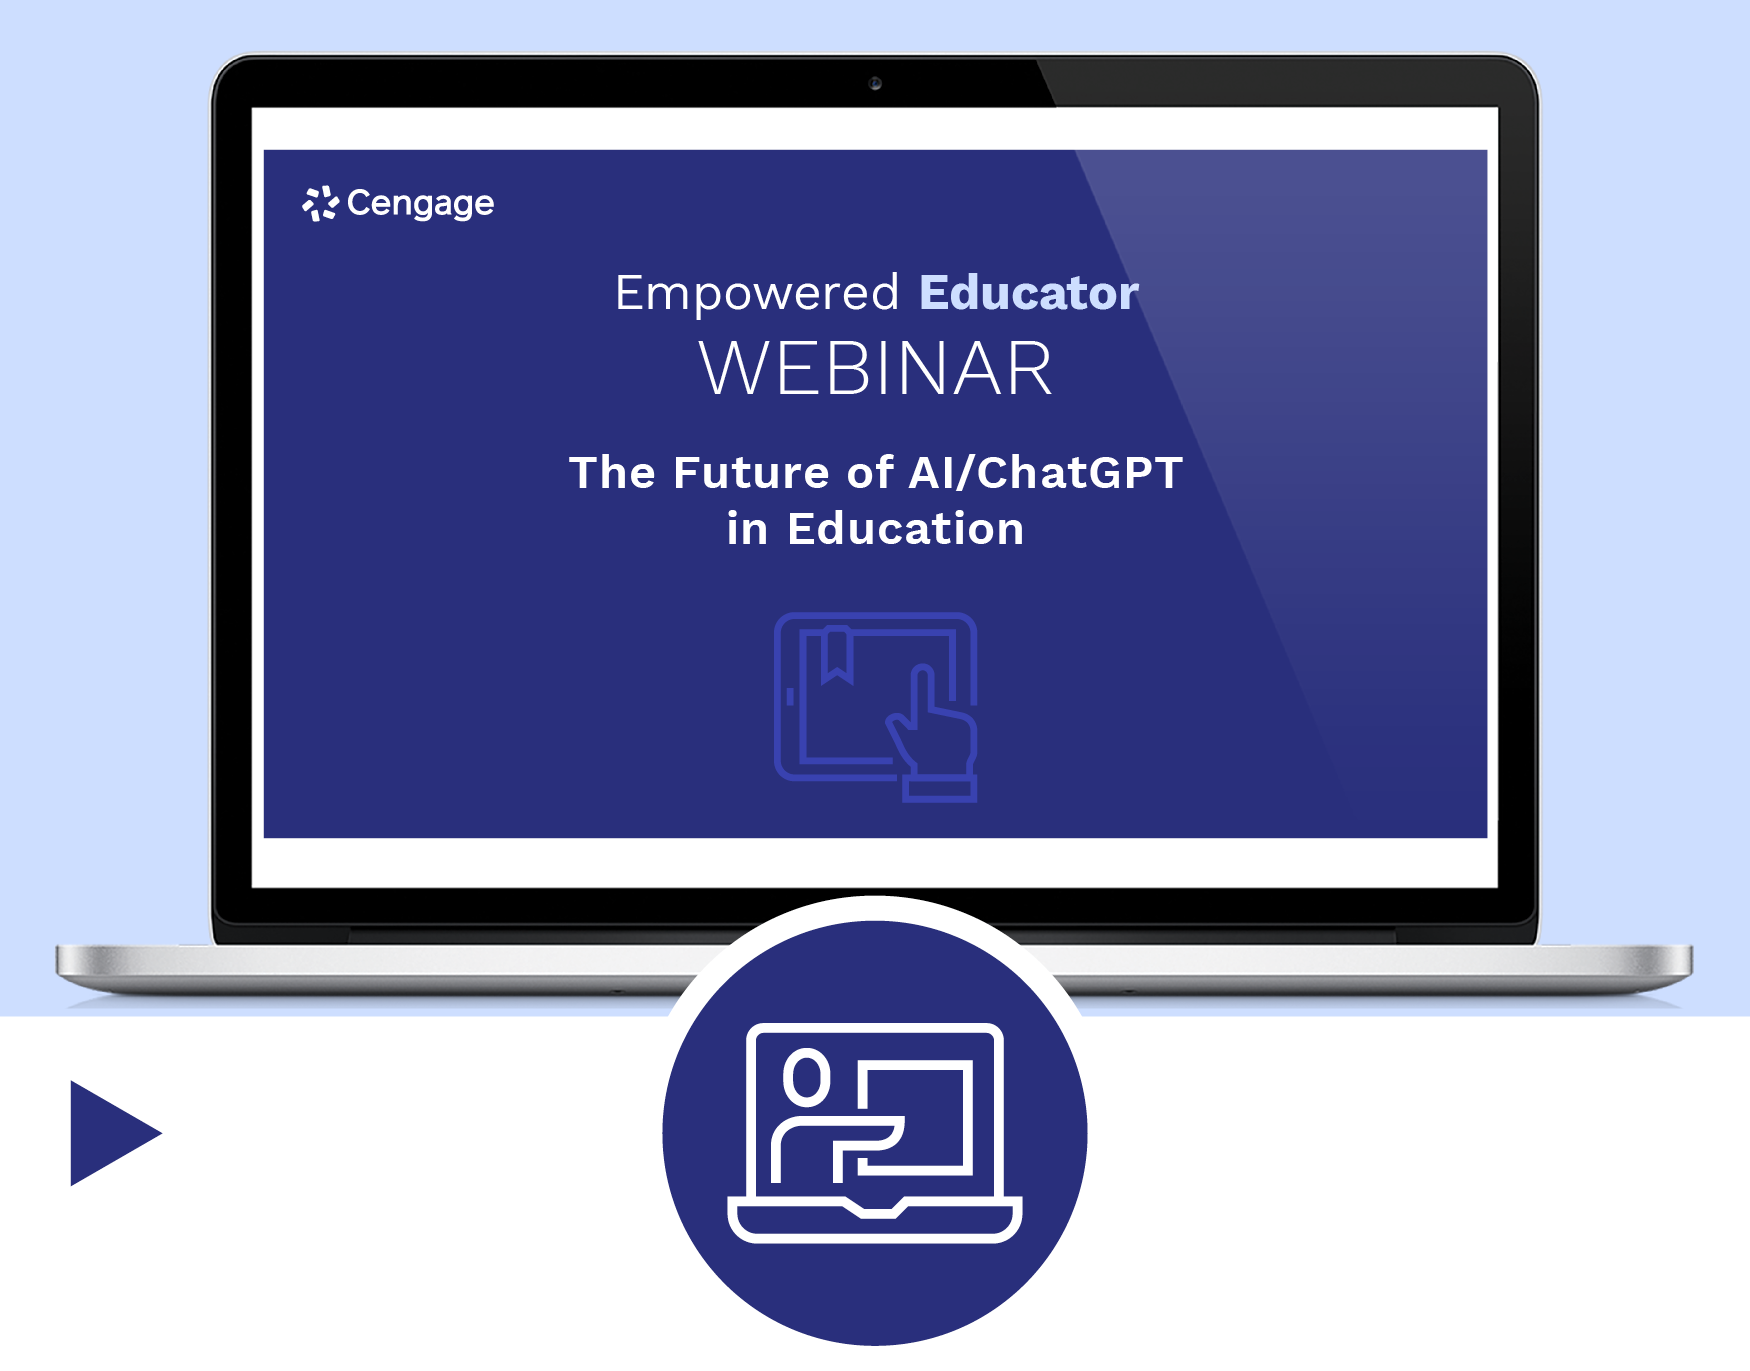 The Future of AI/ChatGPT in Education<br/><br/>